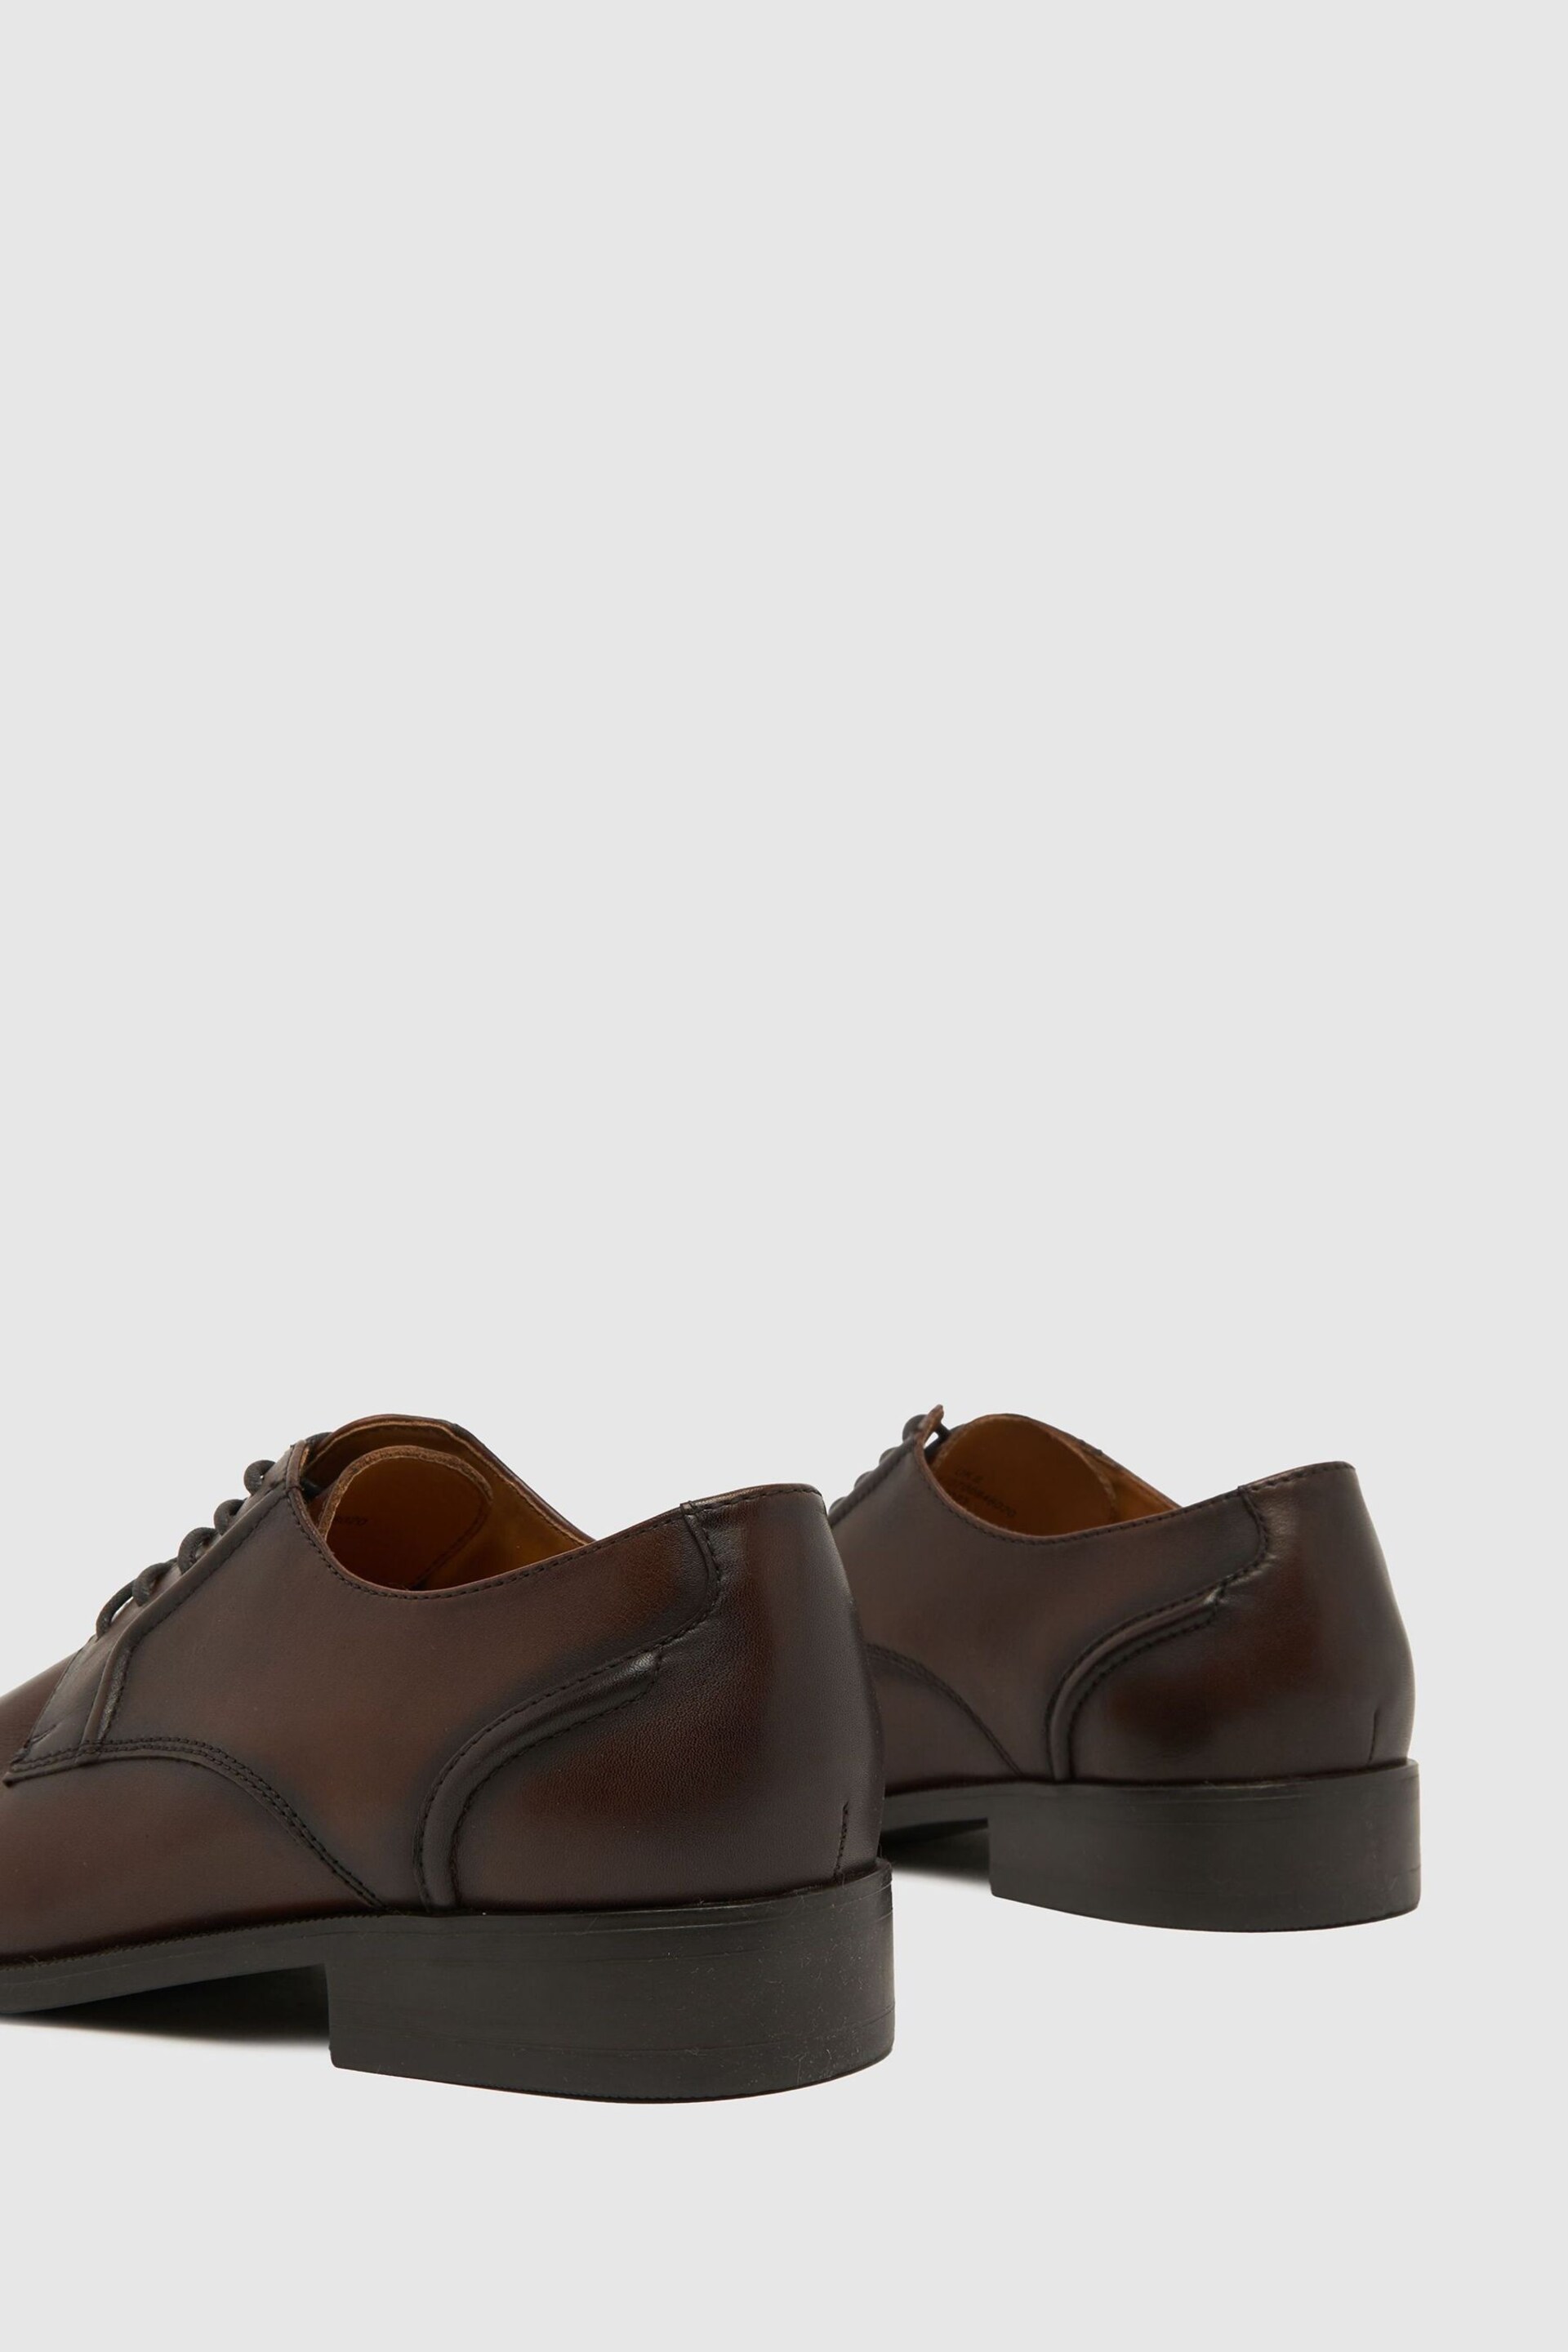 Schuh Reilly Leather Lace-Up Shoes - Image 4 of 4